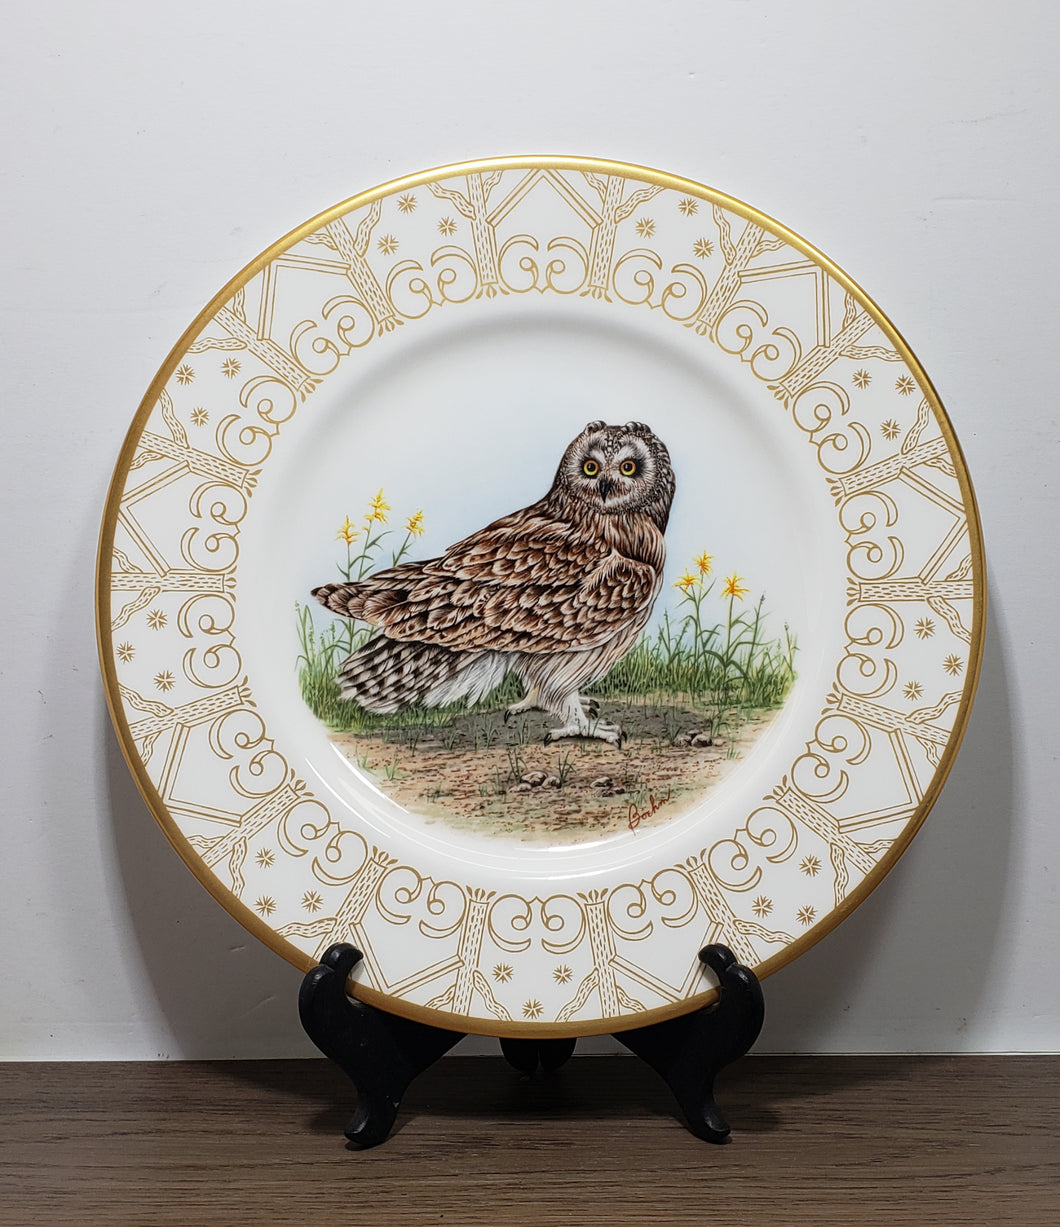 The Edward Marshell Boehm Owl Plate Collection 